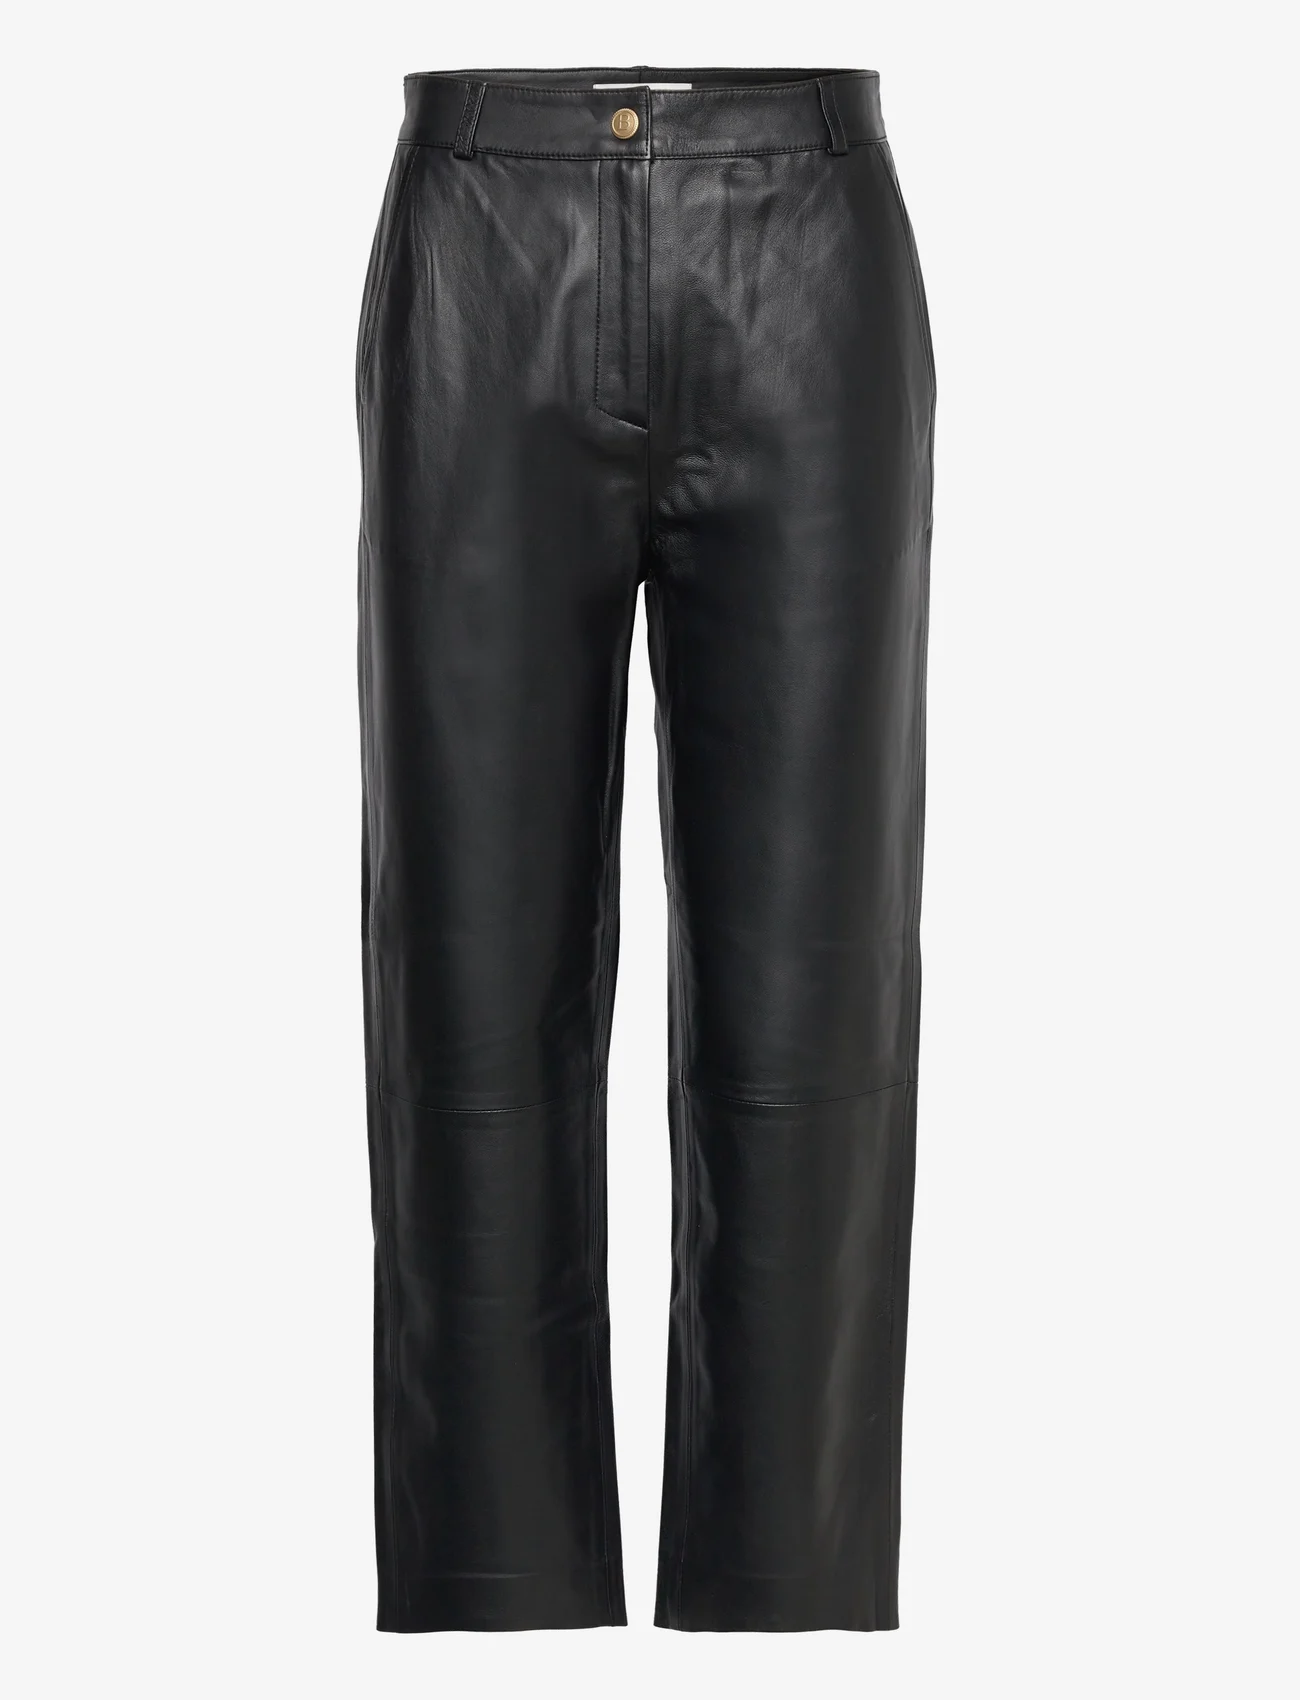 BUSNEL - ANDIE leather trousers - party wear at outlet prices - black - 0